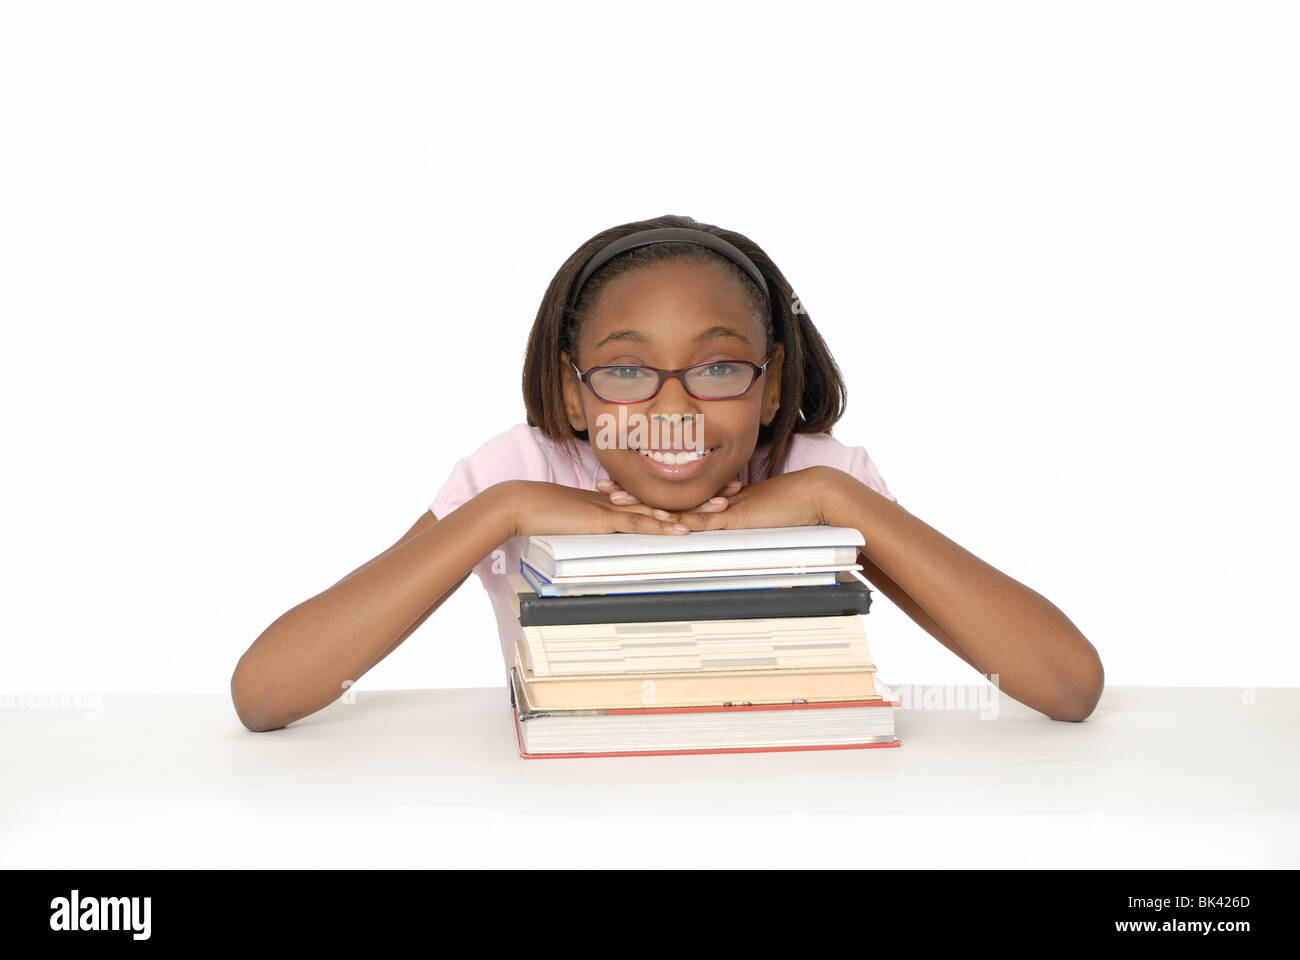 Ten year old girl smiling and leaning on a stack of books. Stock Photo